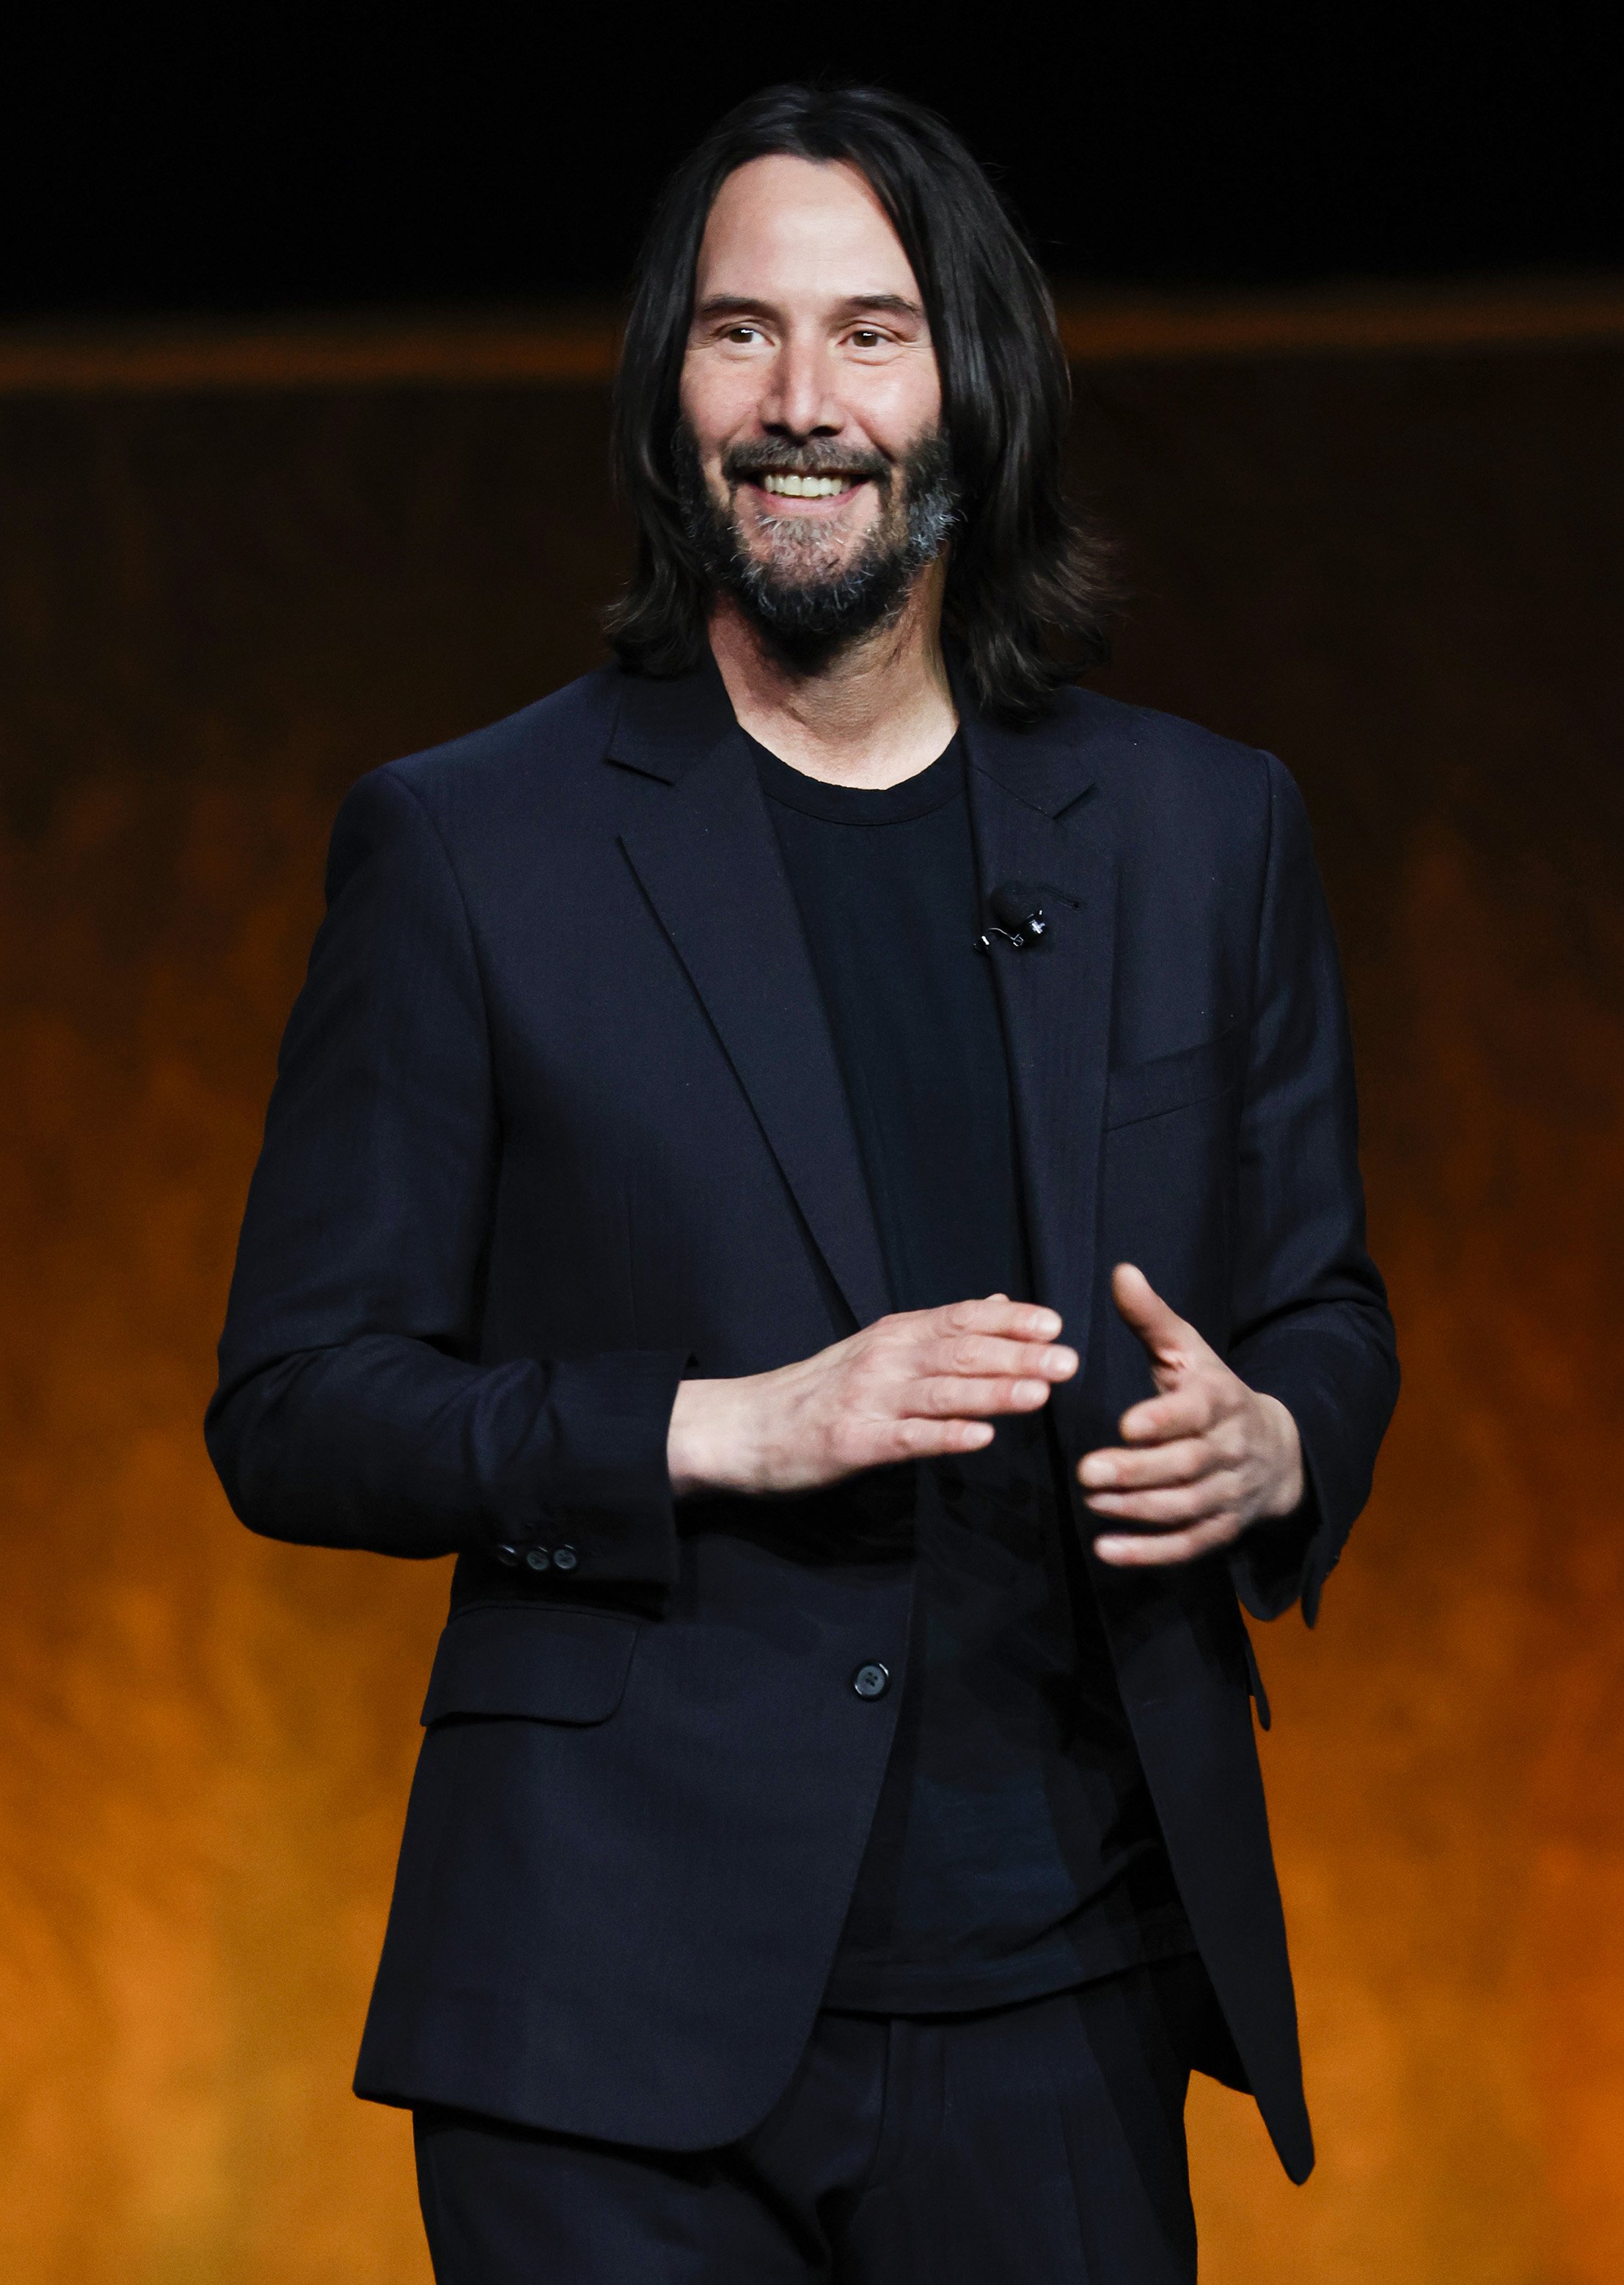 Keanu Reeves speaks onstage at The Colosseum at Caesars Palace during CinemaCon on April 28, 2022, in Las Vegas, Nevada | Source: Getty Images